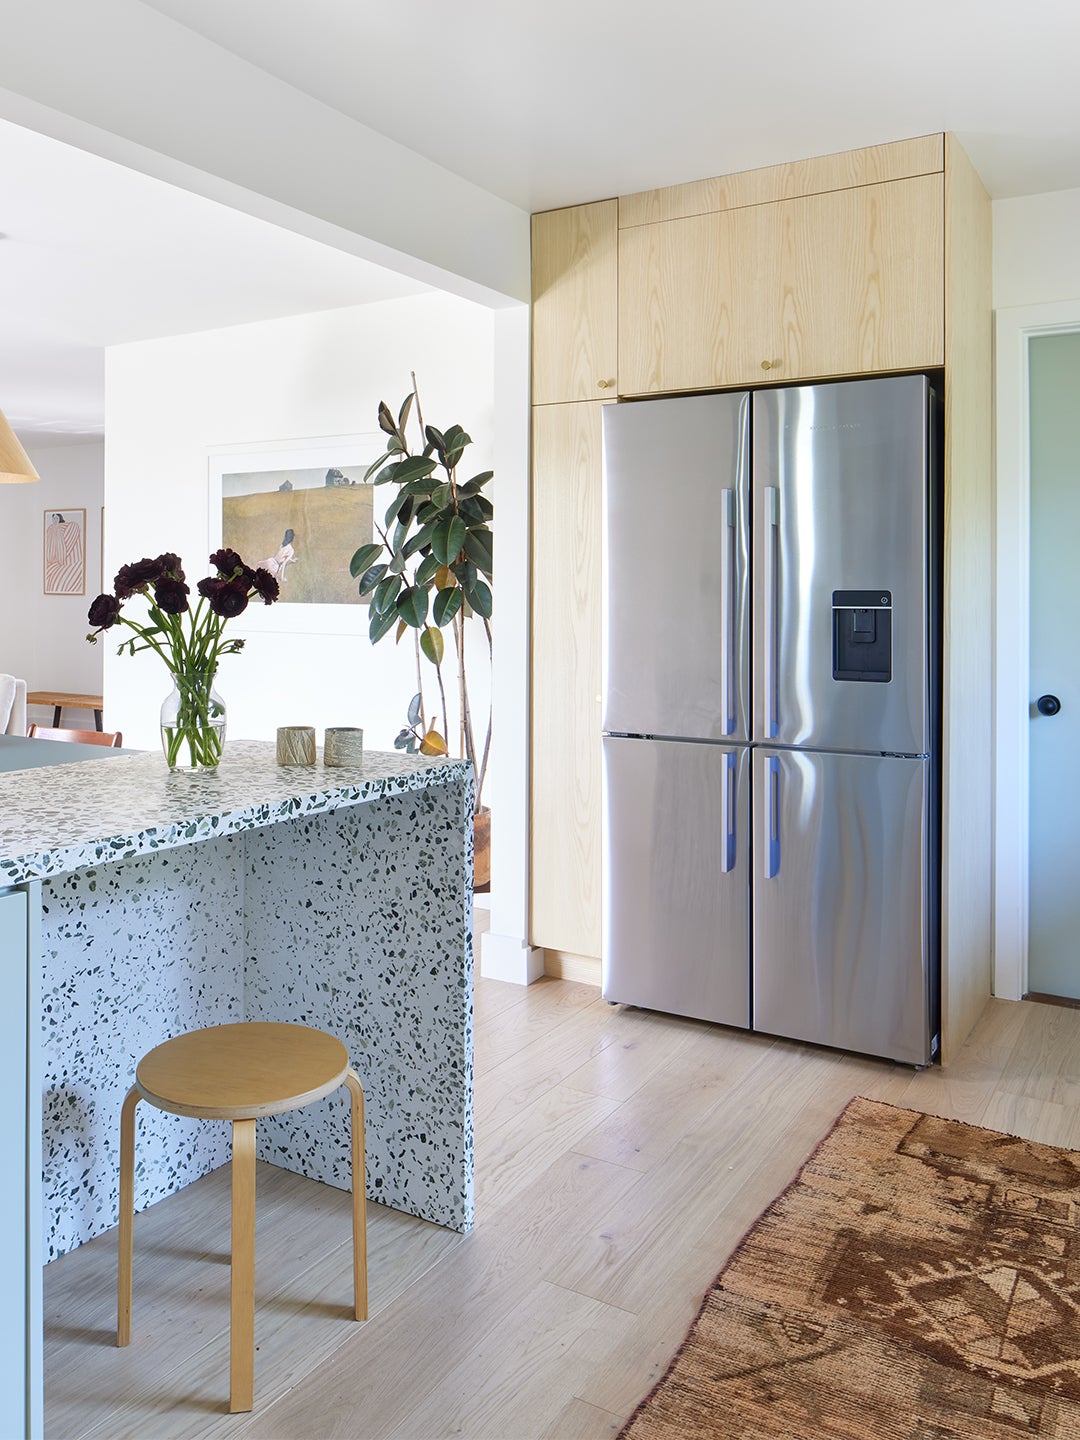 fridge surrounded by light wood cabinets